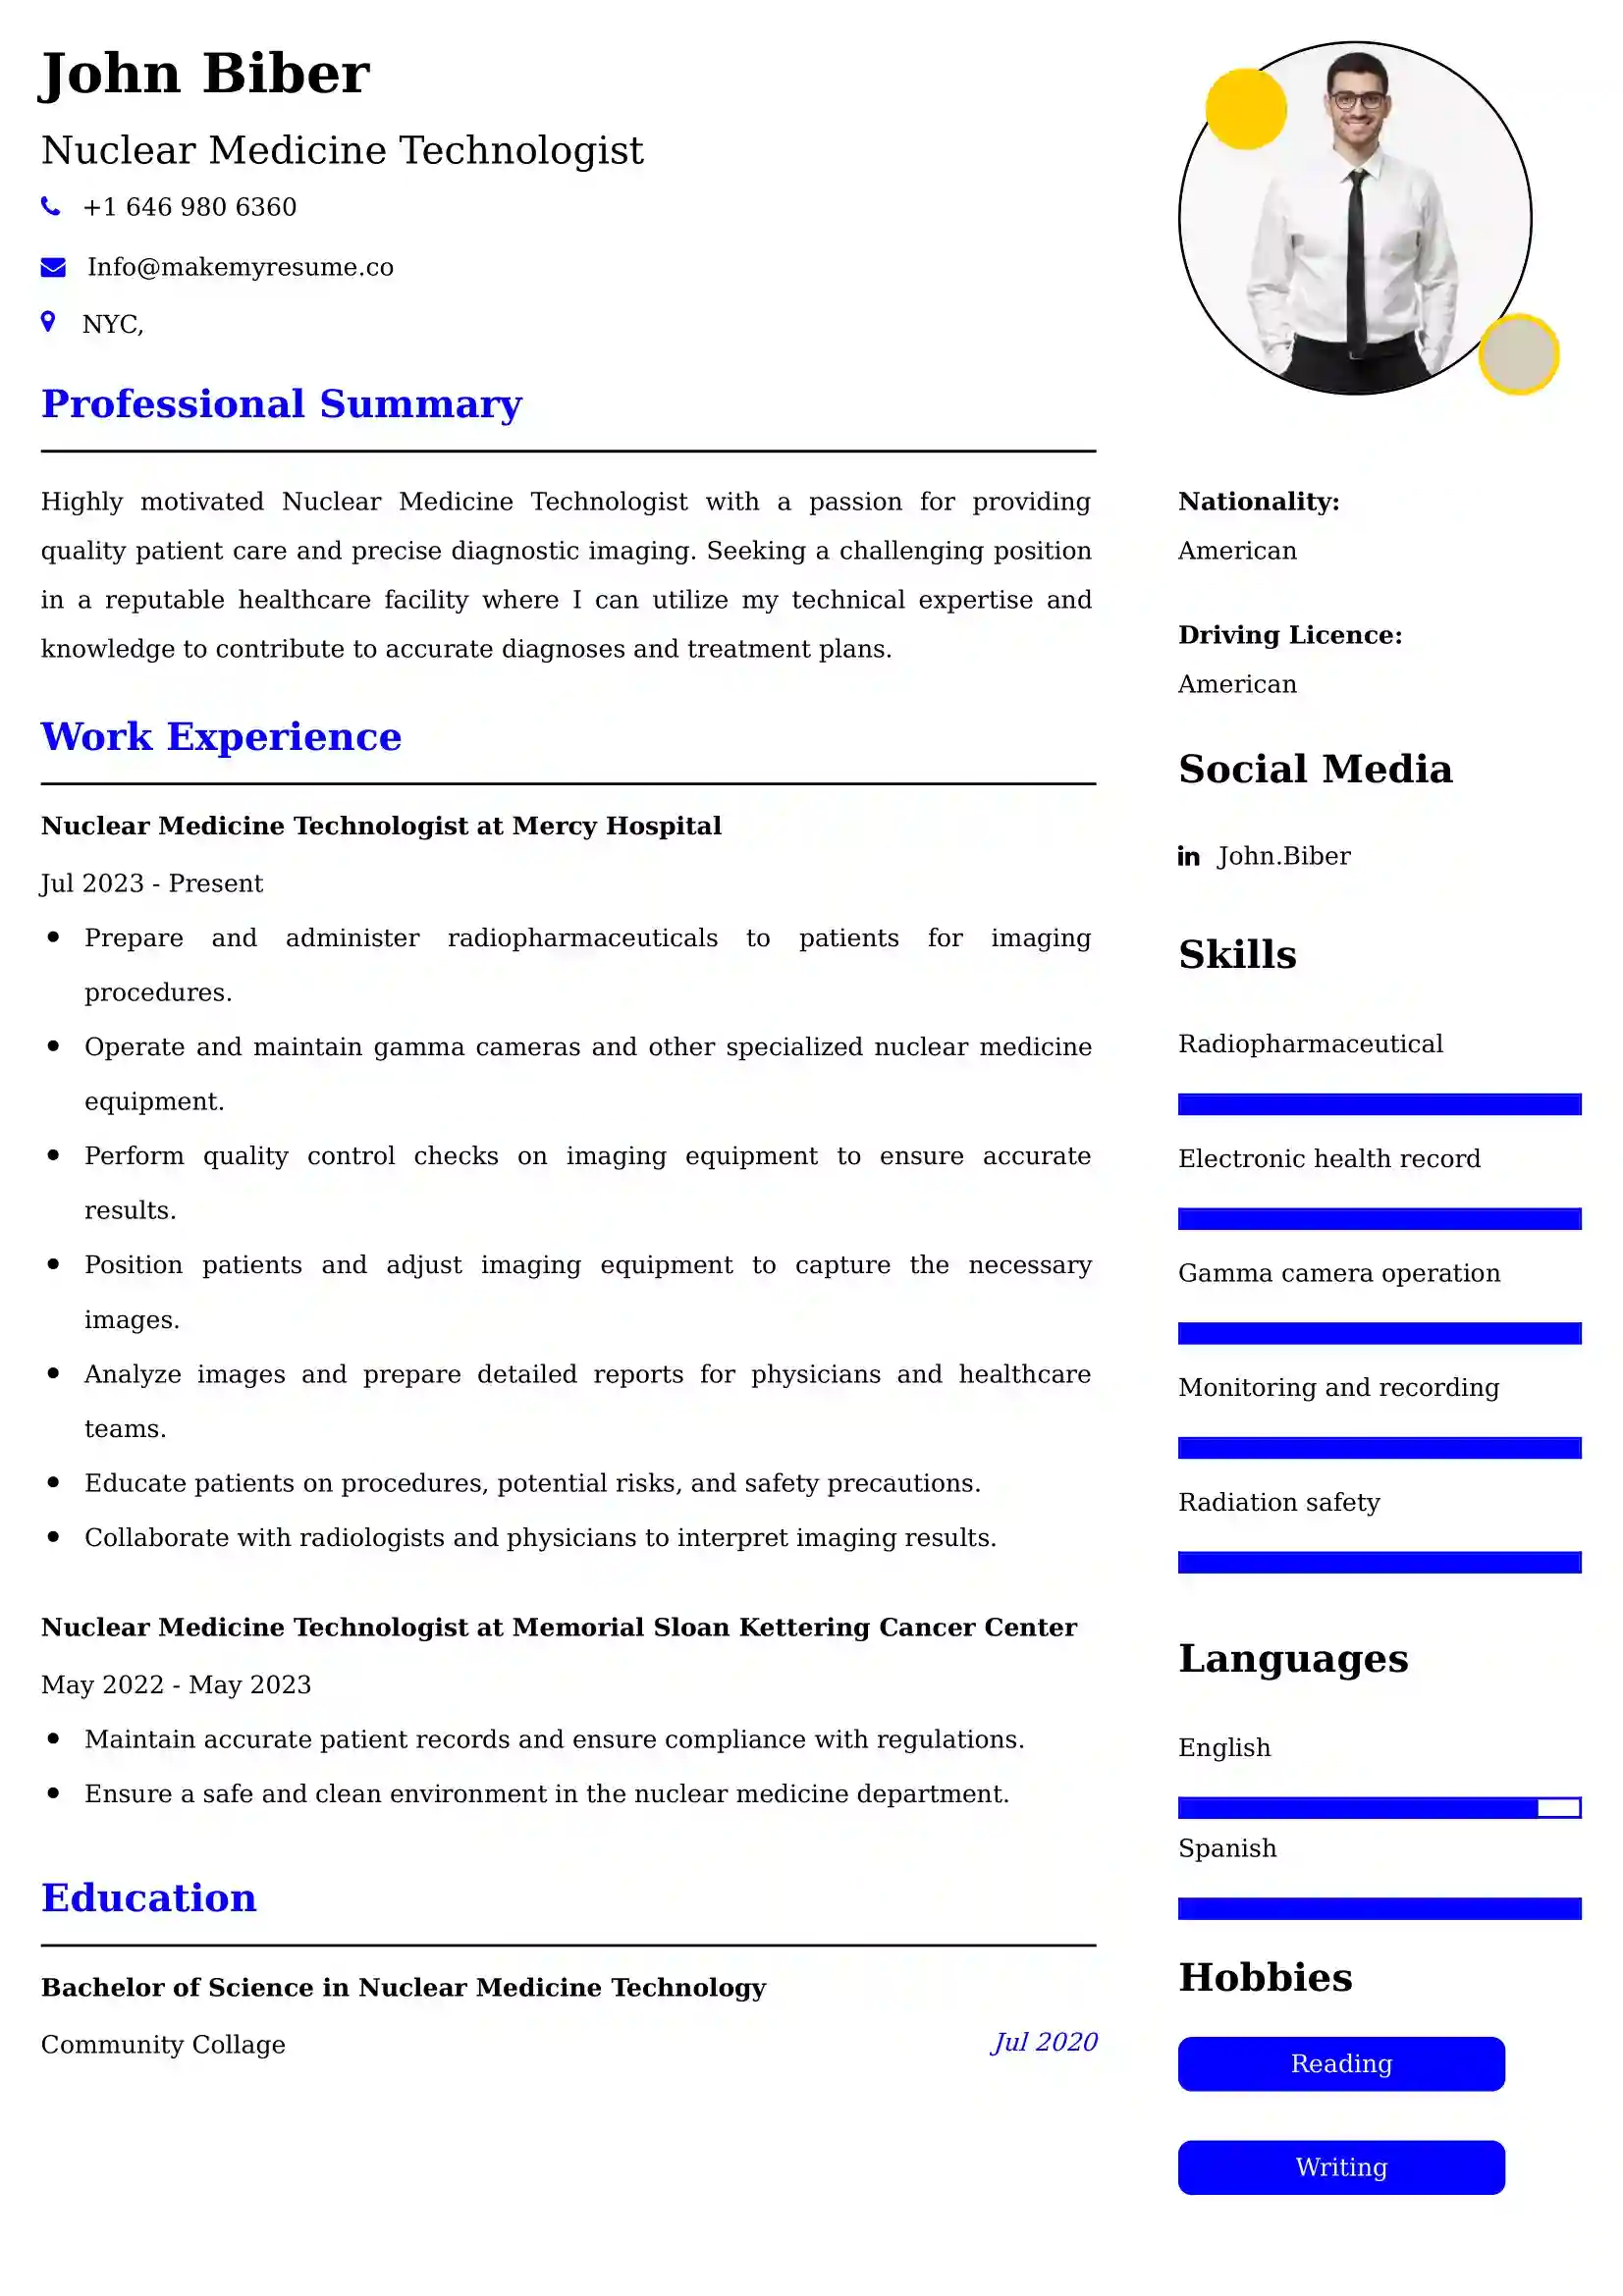 Nuclear Medicine Technologist Resume Examples India